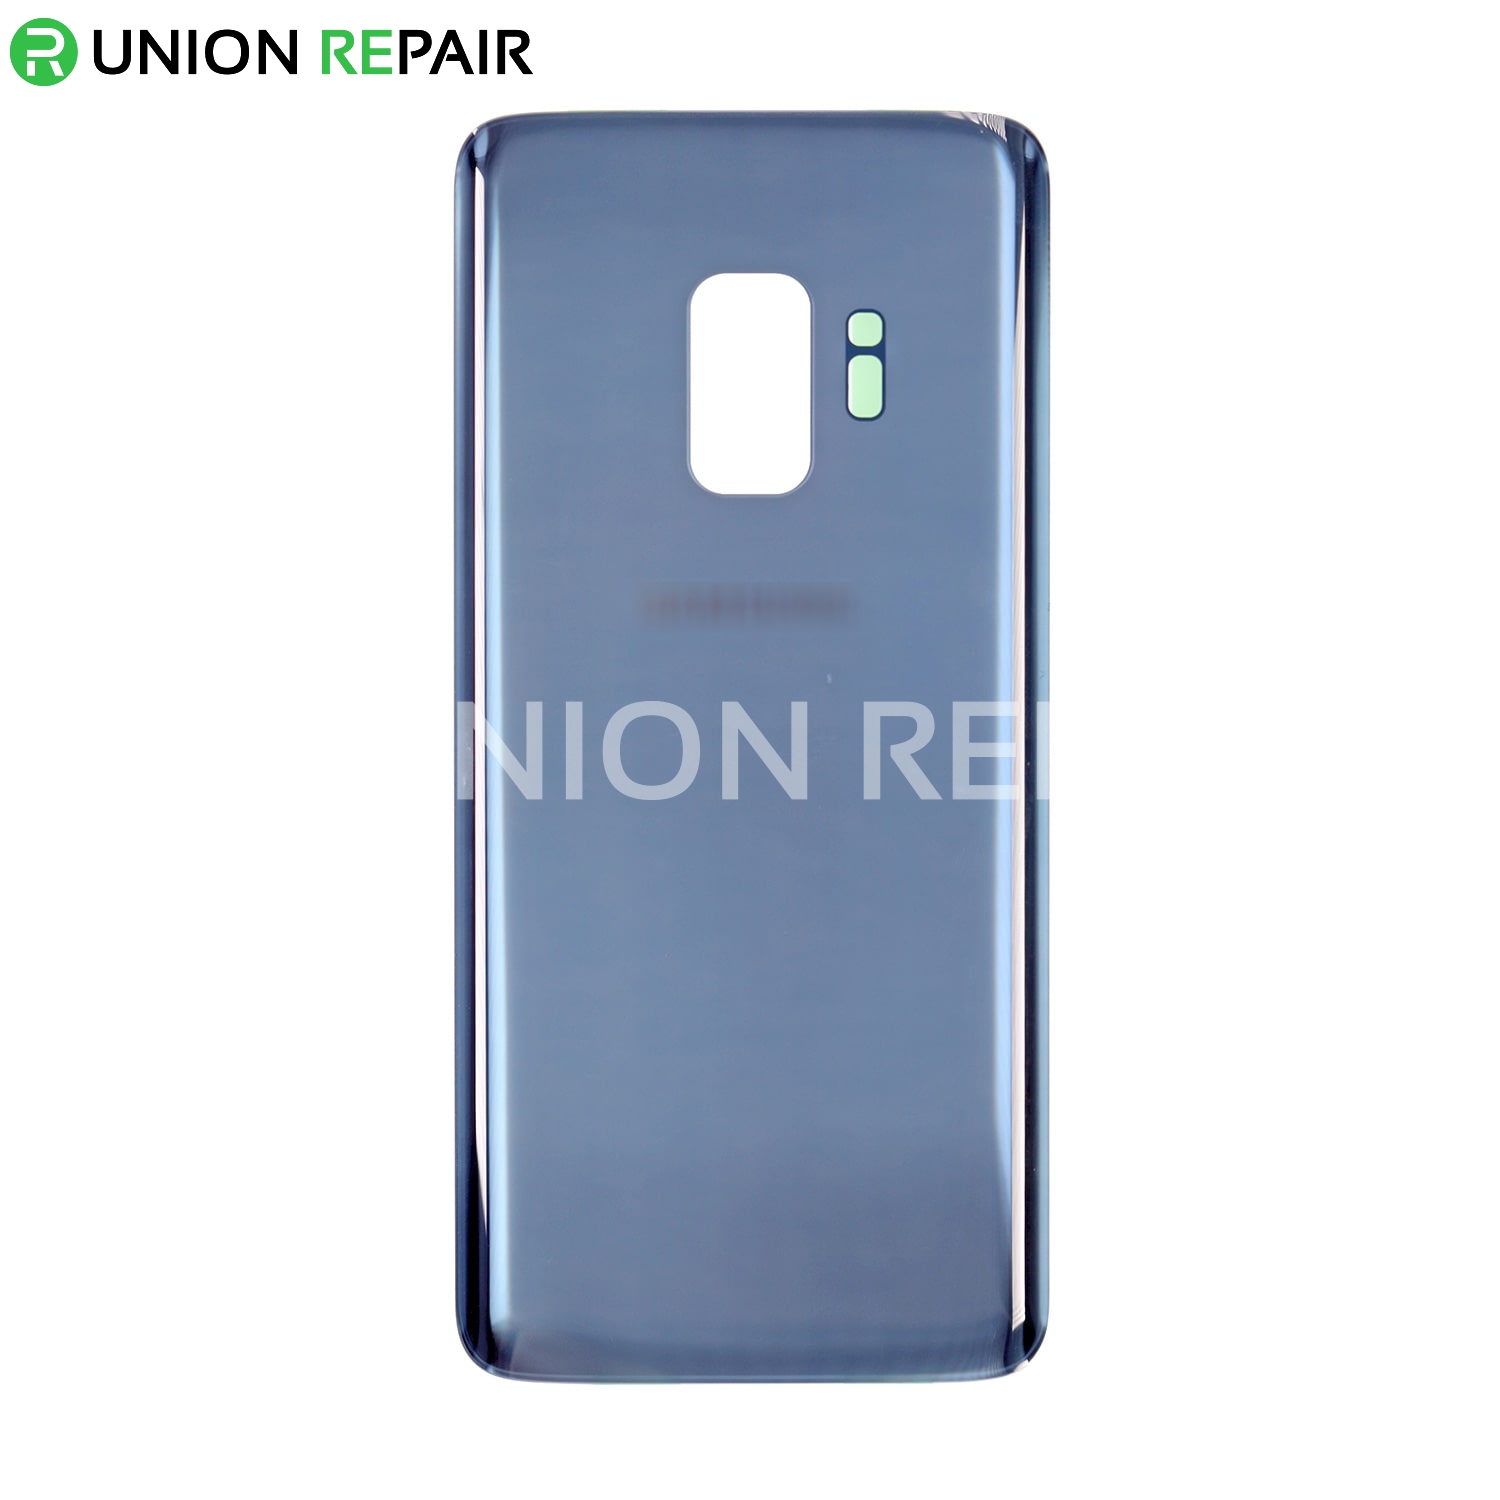 Replacement for Samsung Galaxy S9 SM-G960 Back Cover - Coral Blue